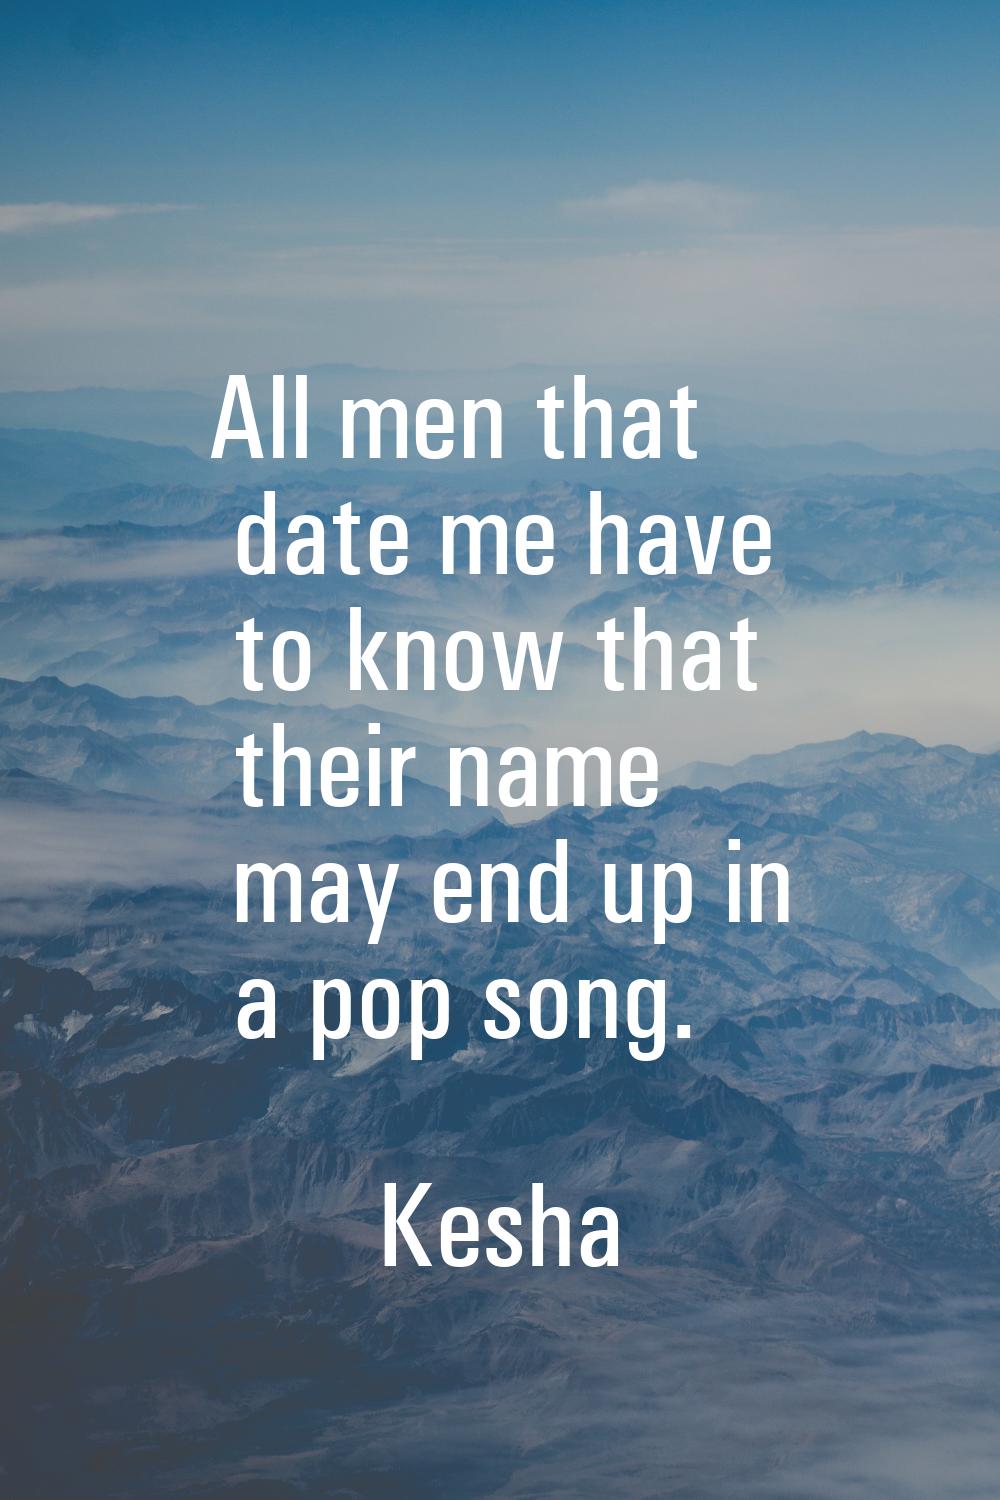 All men that date me have to know that their name may end up in a pop song.